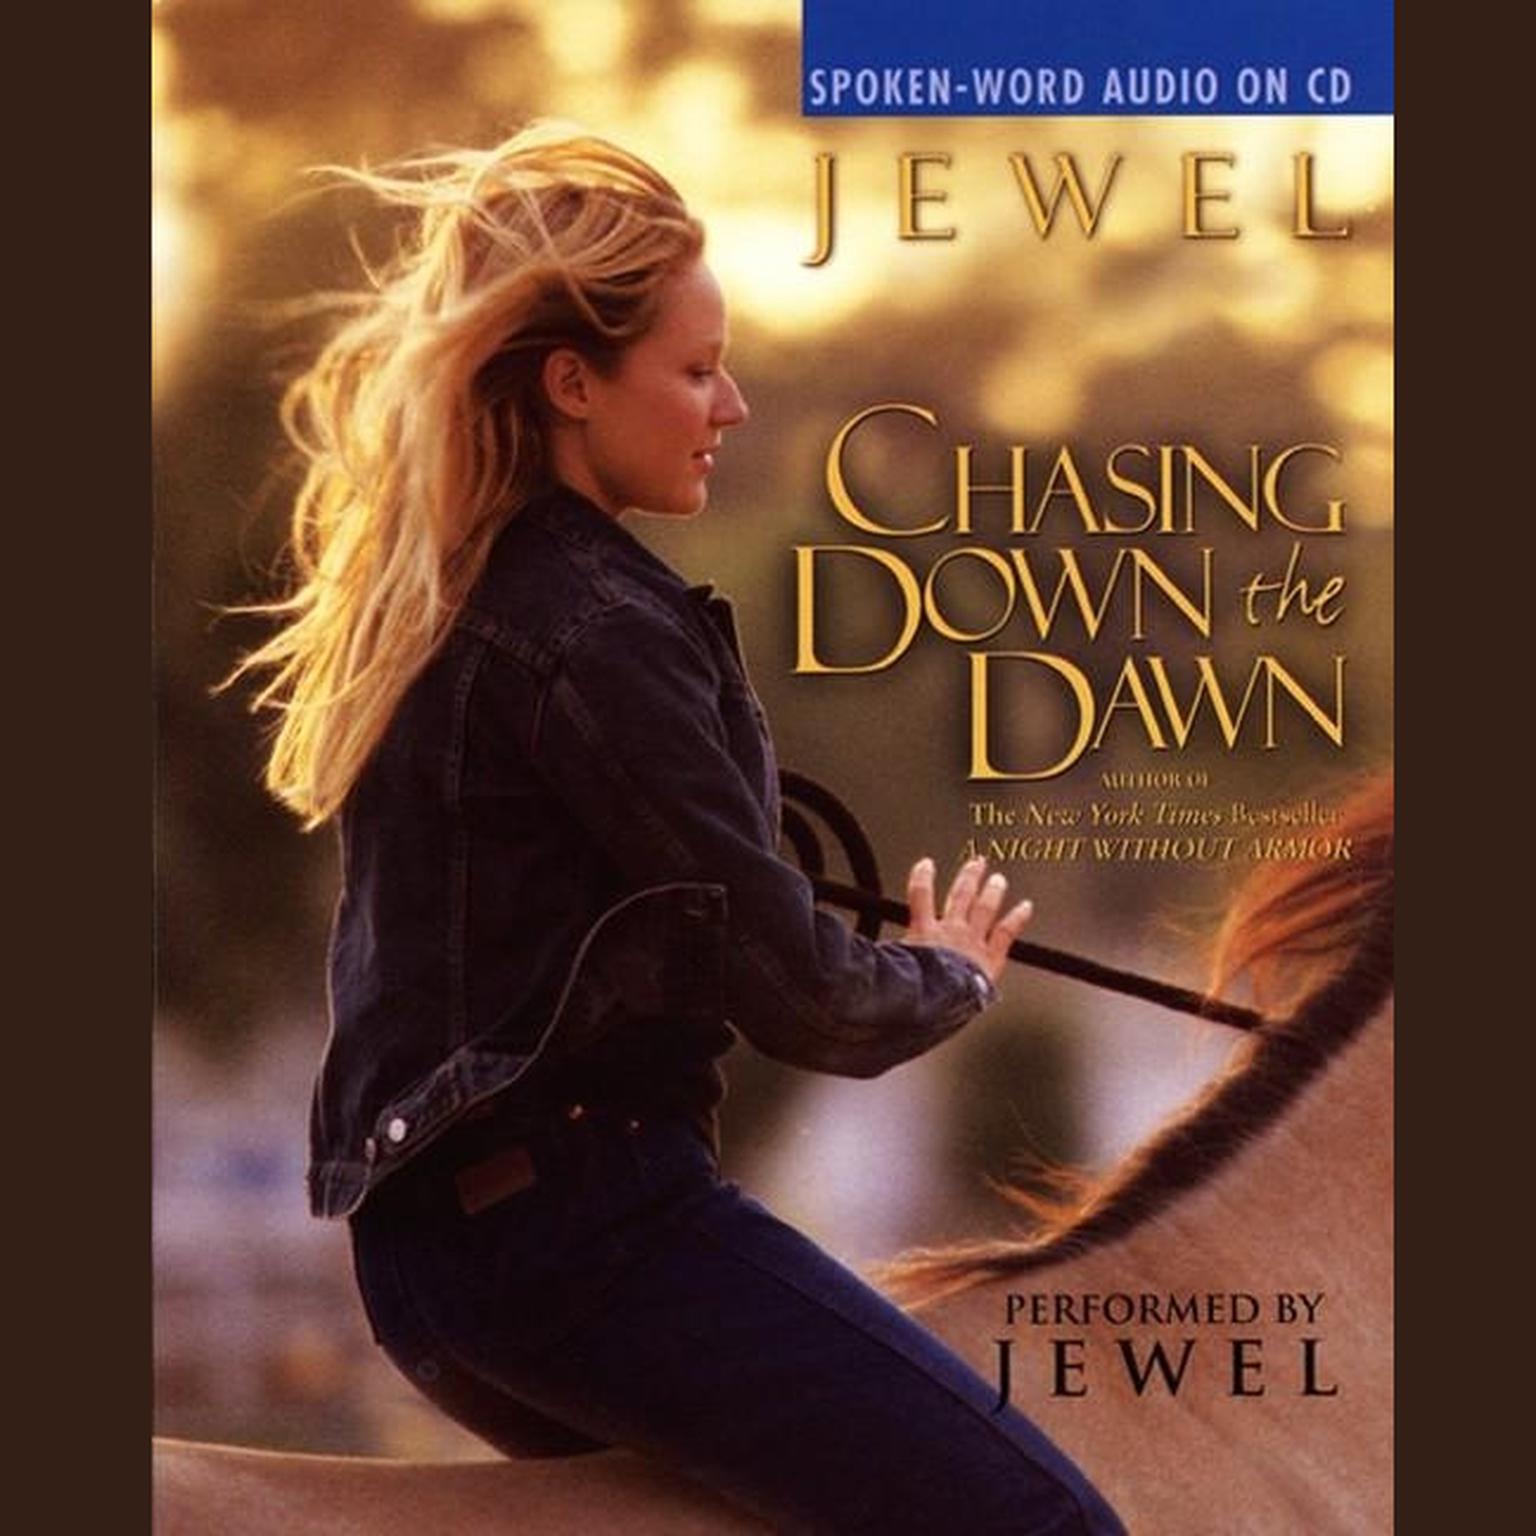 Chasing Down the Dawn (Abridged) Audiobook, by Jewel